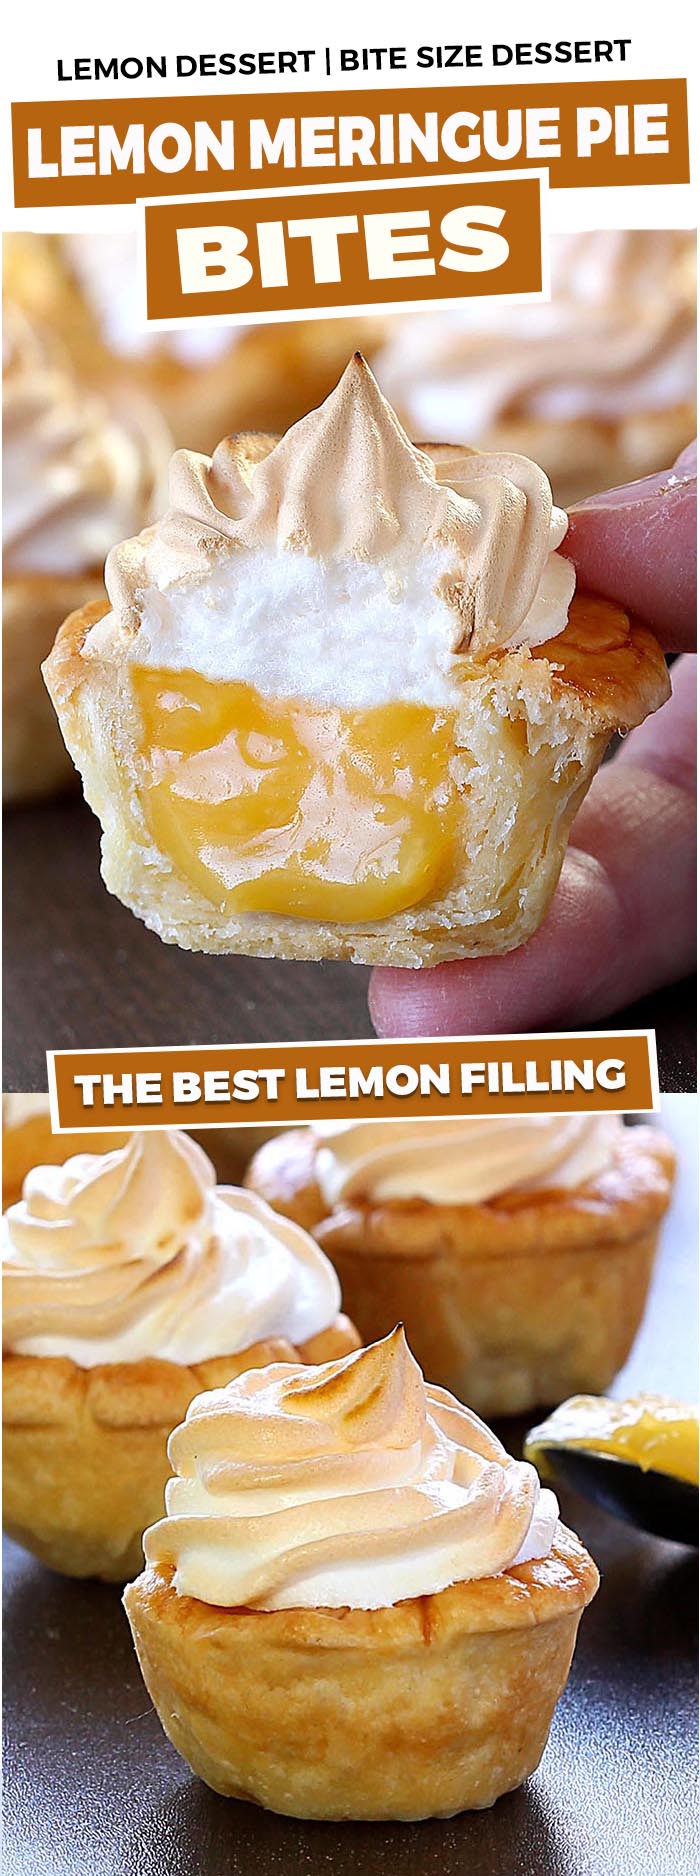 All the flavors of Homemade Lemon Meringue Pie packed into perfect portable dessert for any occasion or season. – Best Ever Lemon Meringue Pie Bites....